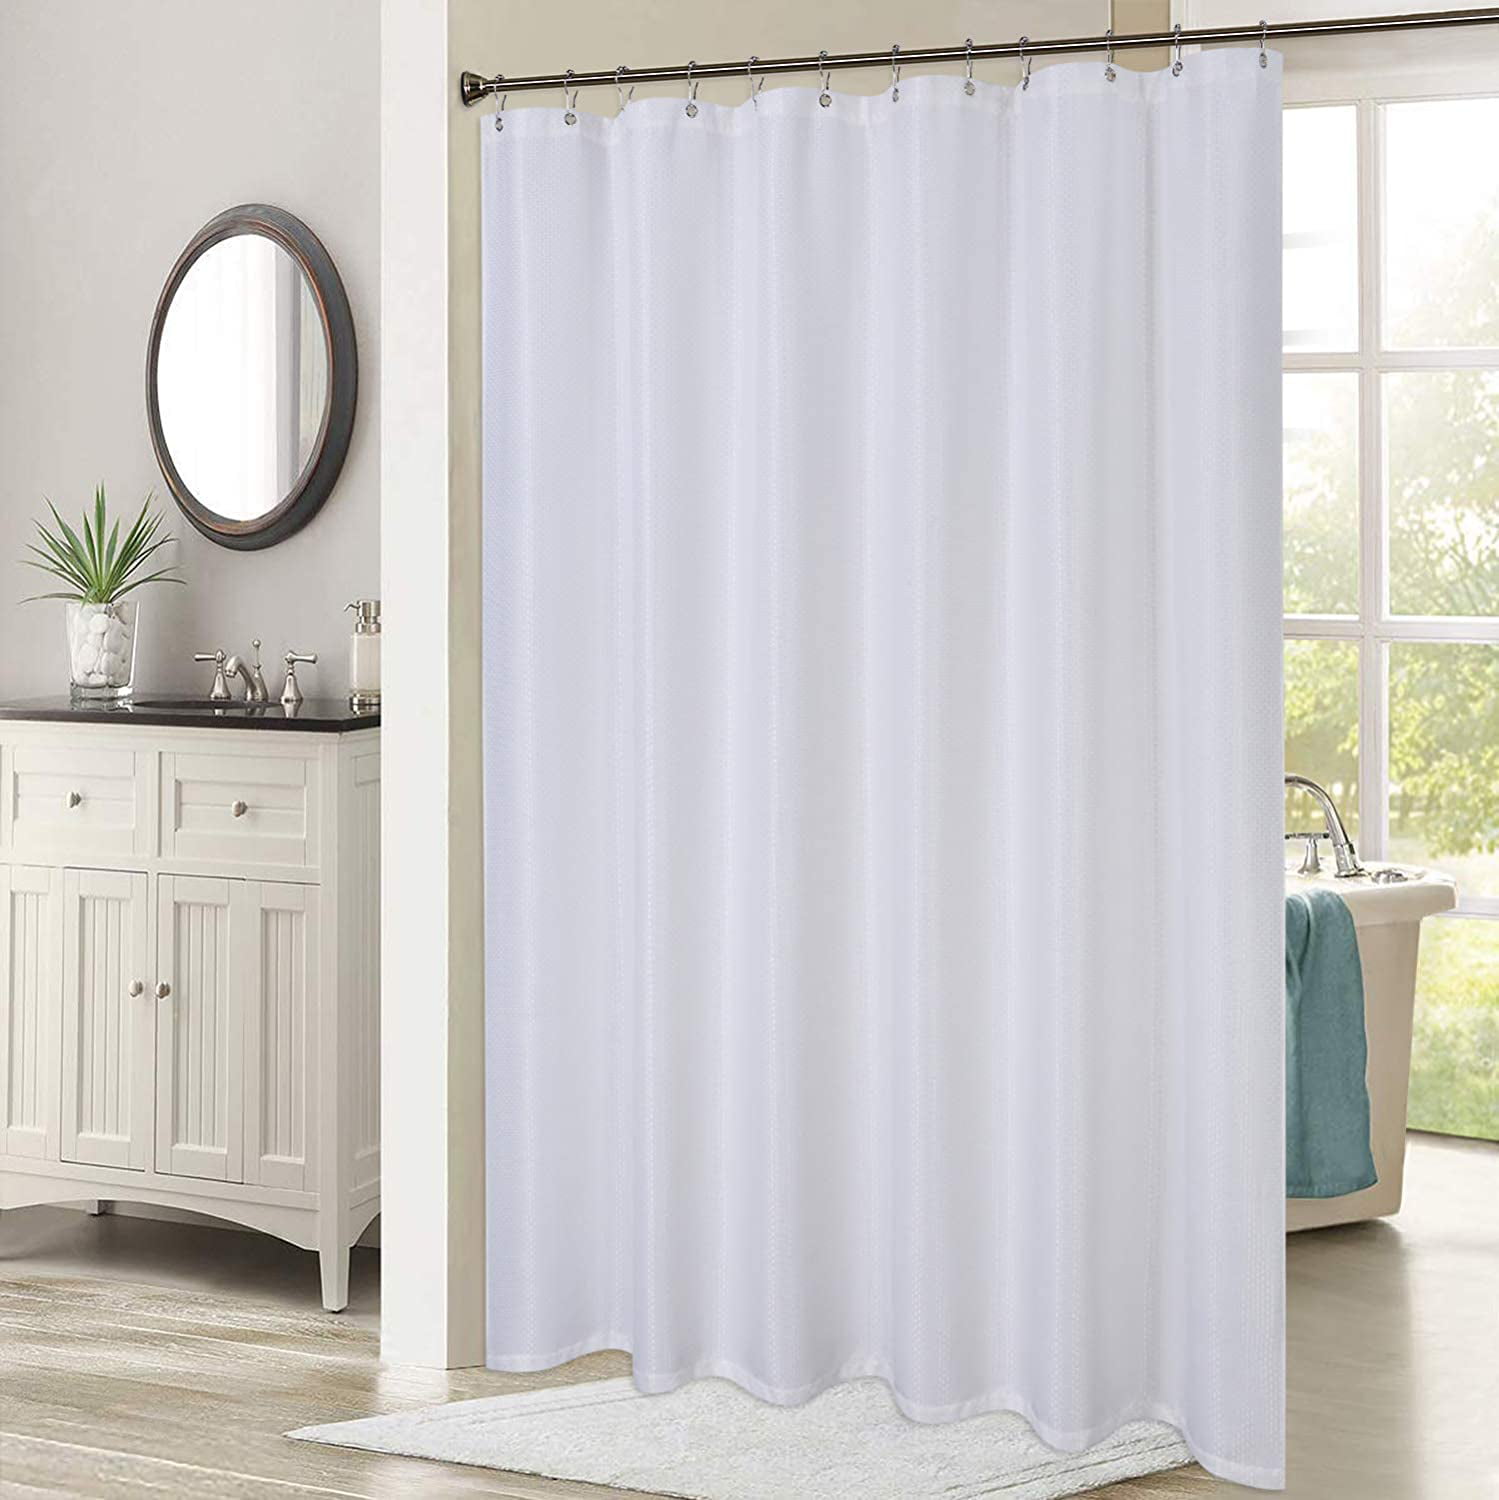 Caromio Shower Curtains 78 Inches Long, Do They Make Shower Curtains Longer Than 72